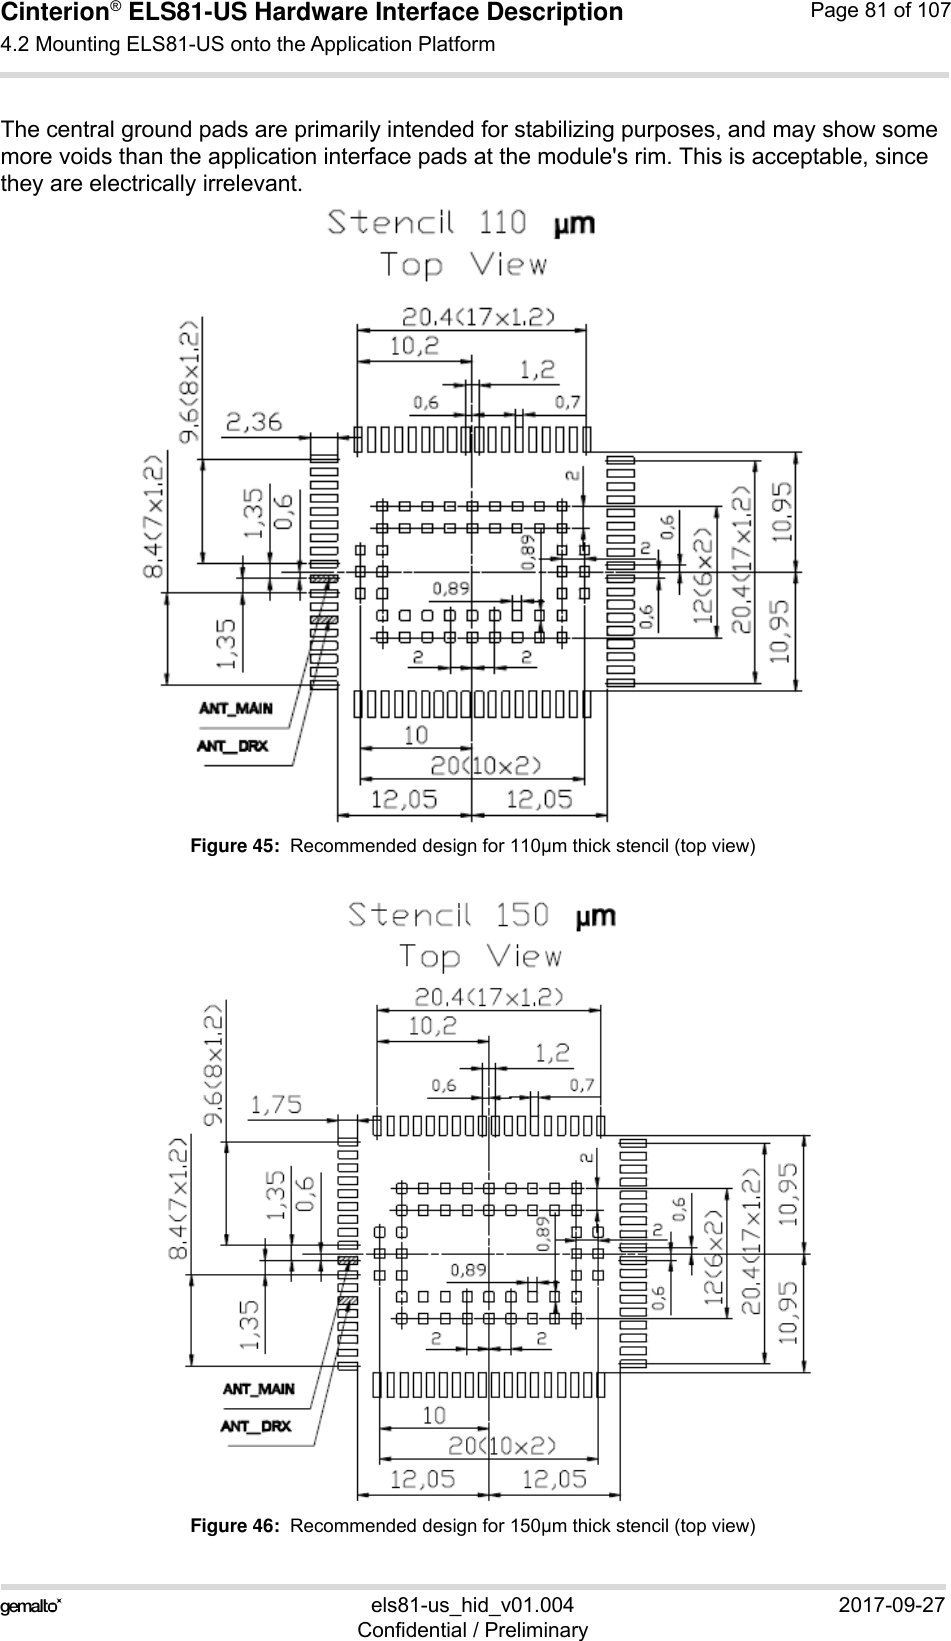 Cinterion® ELS81-US Hardware Interface Description4.2 Mounting ELS81-US onto the Application Platform92els81-us_hid_v01.004 2017-09-27Confidential / PreliminaryPage 81 of 107The central ground pads are primarily intended for stabilizing purposes, and may show some more voids than the application interface pads at the module&apos;s rim. This is acceptable, since they are electrically irrelevant.Figure 45:  Recommended design for 110µm thick stencil (top view)Figure 46:  Recommended design for 150µm thick stencil (top view)